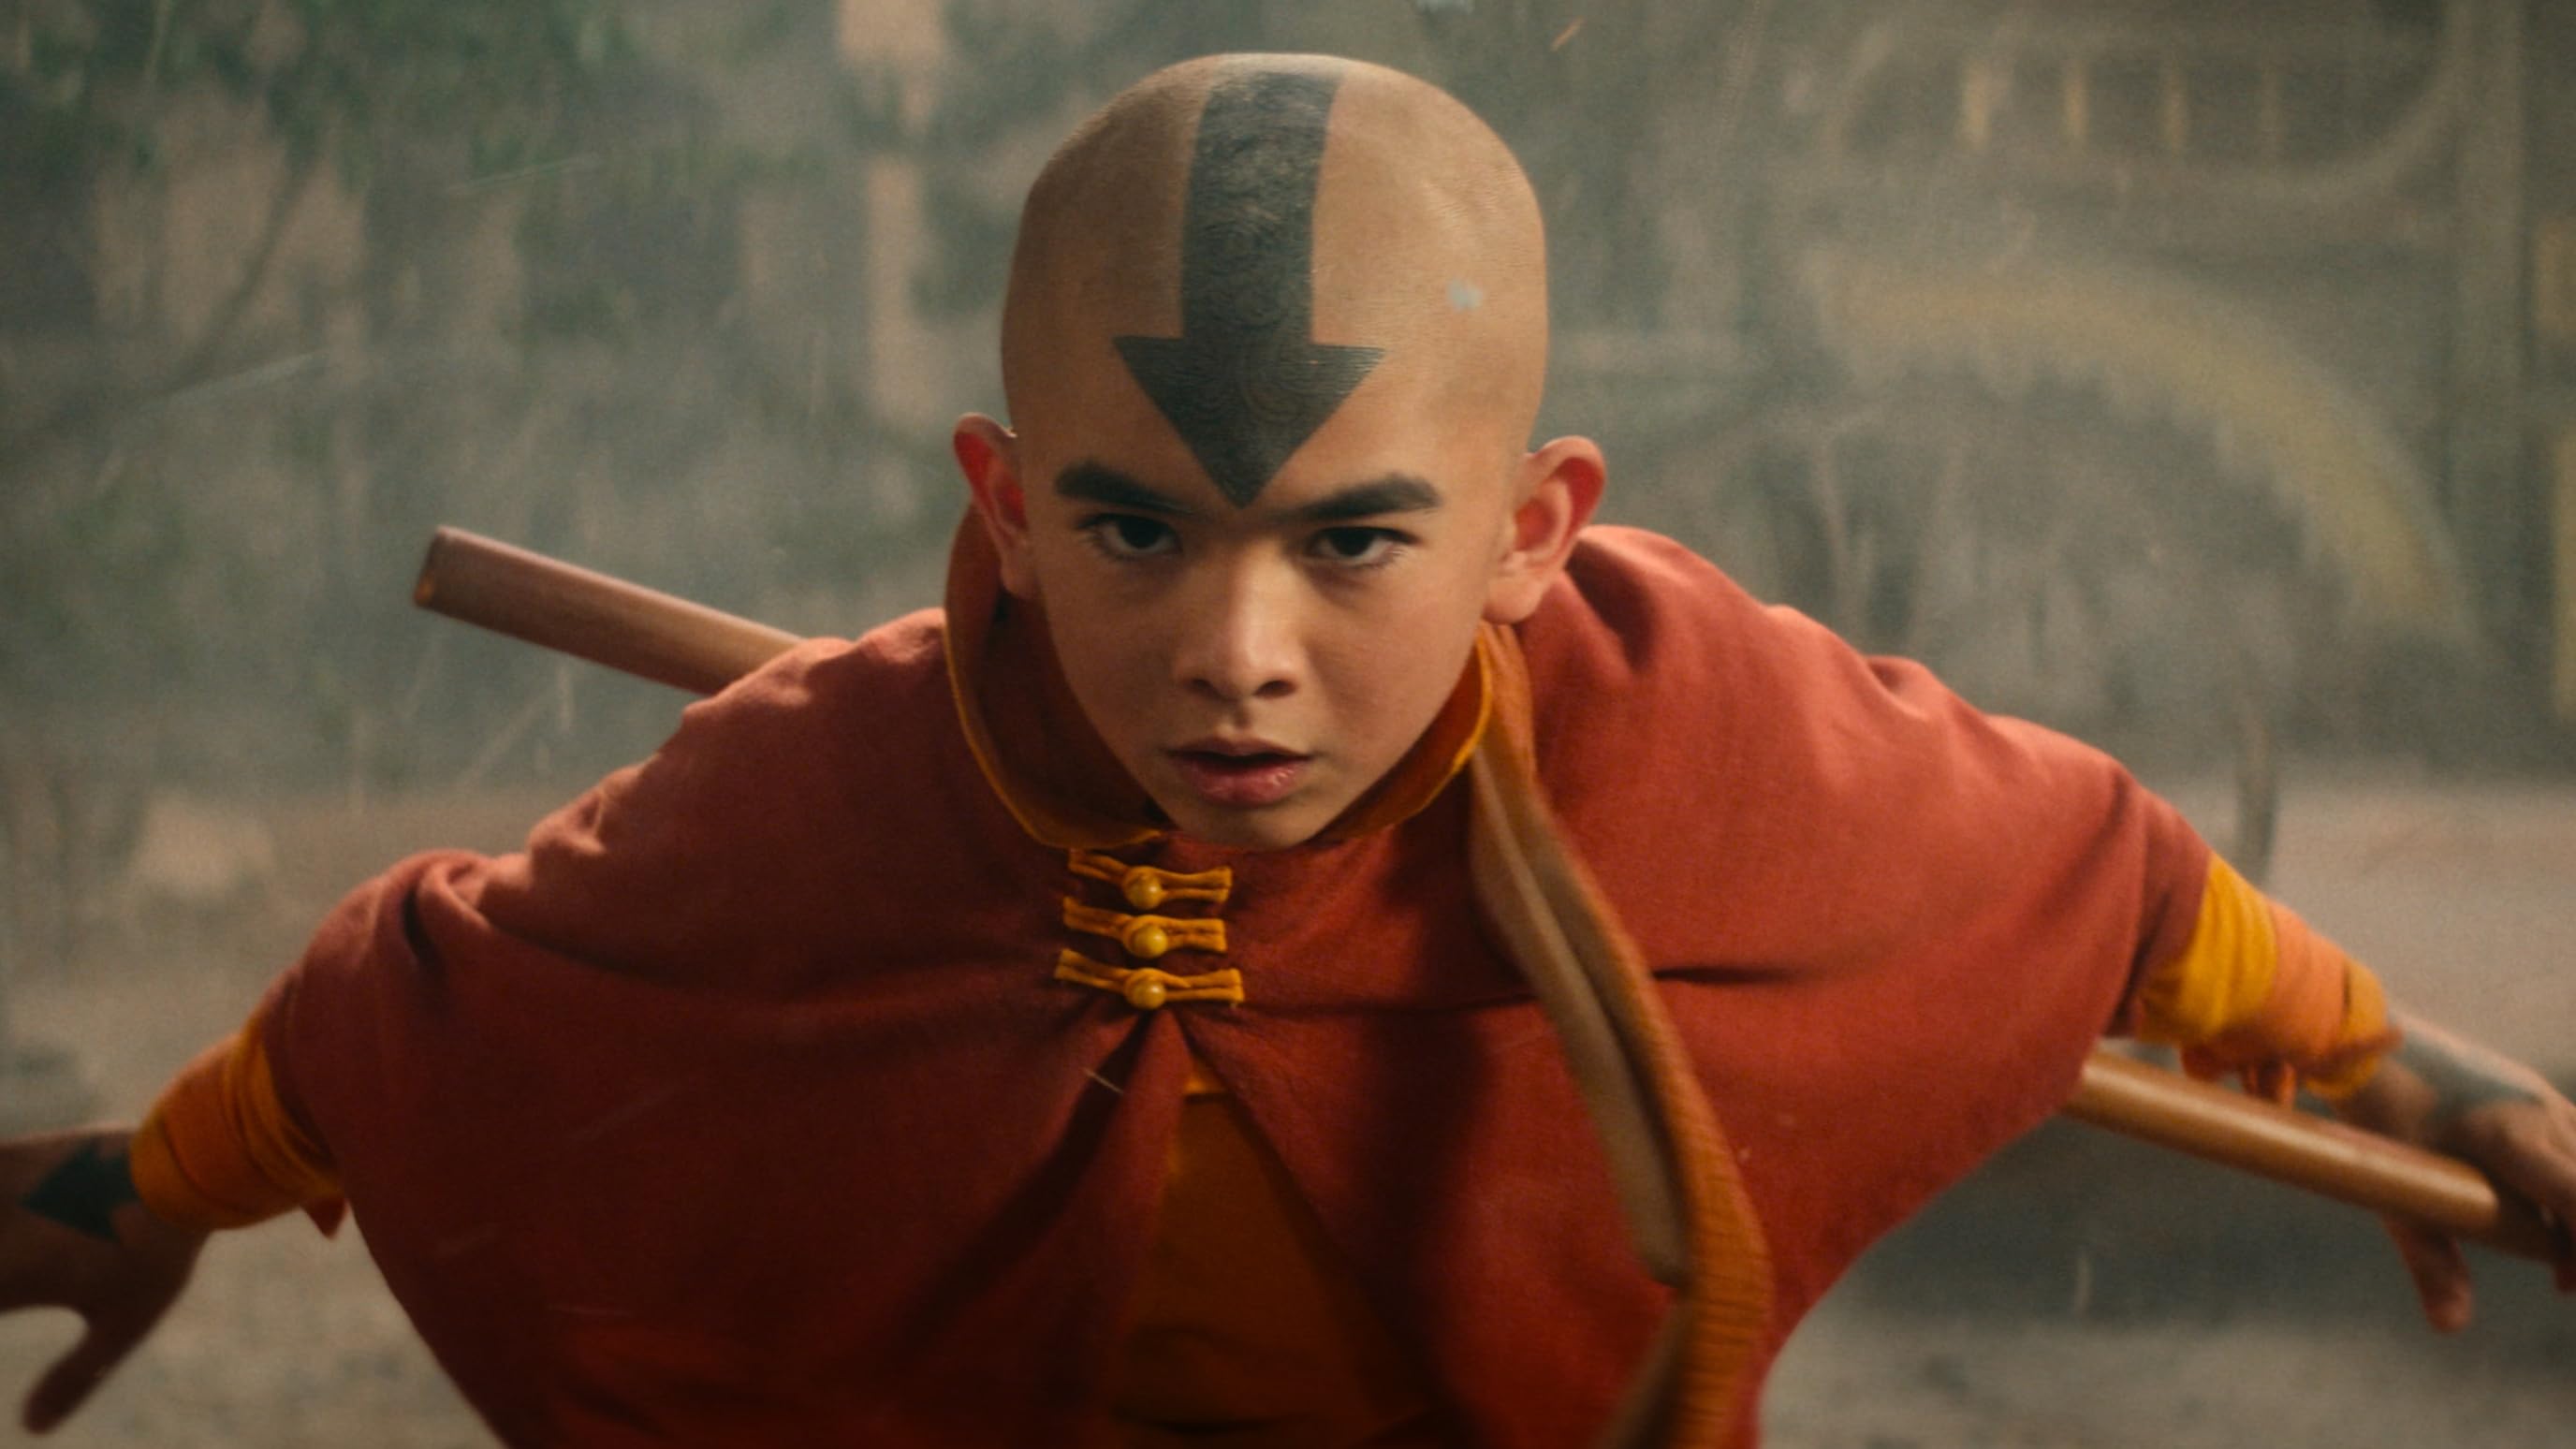 brendie thompson recommends Avatar The Last Airbender Photos